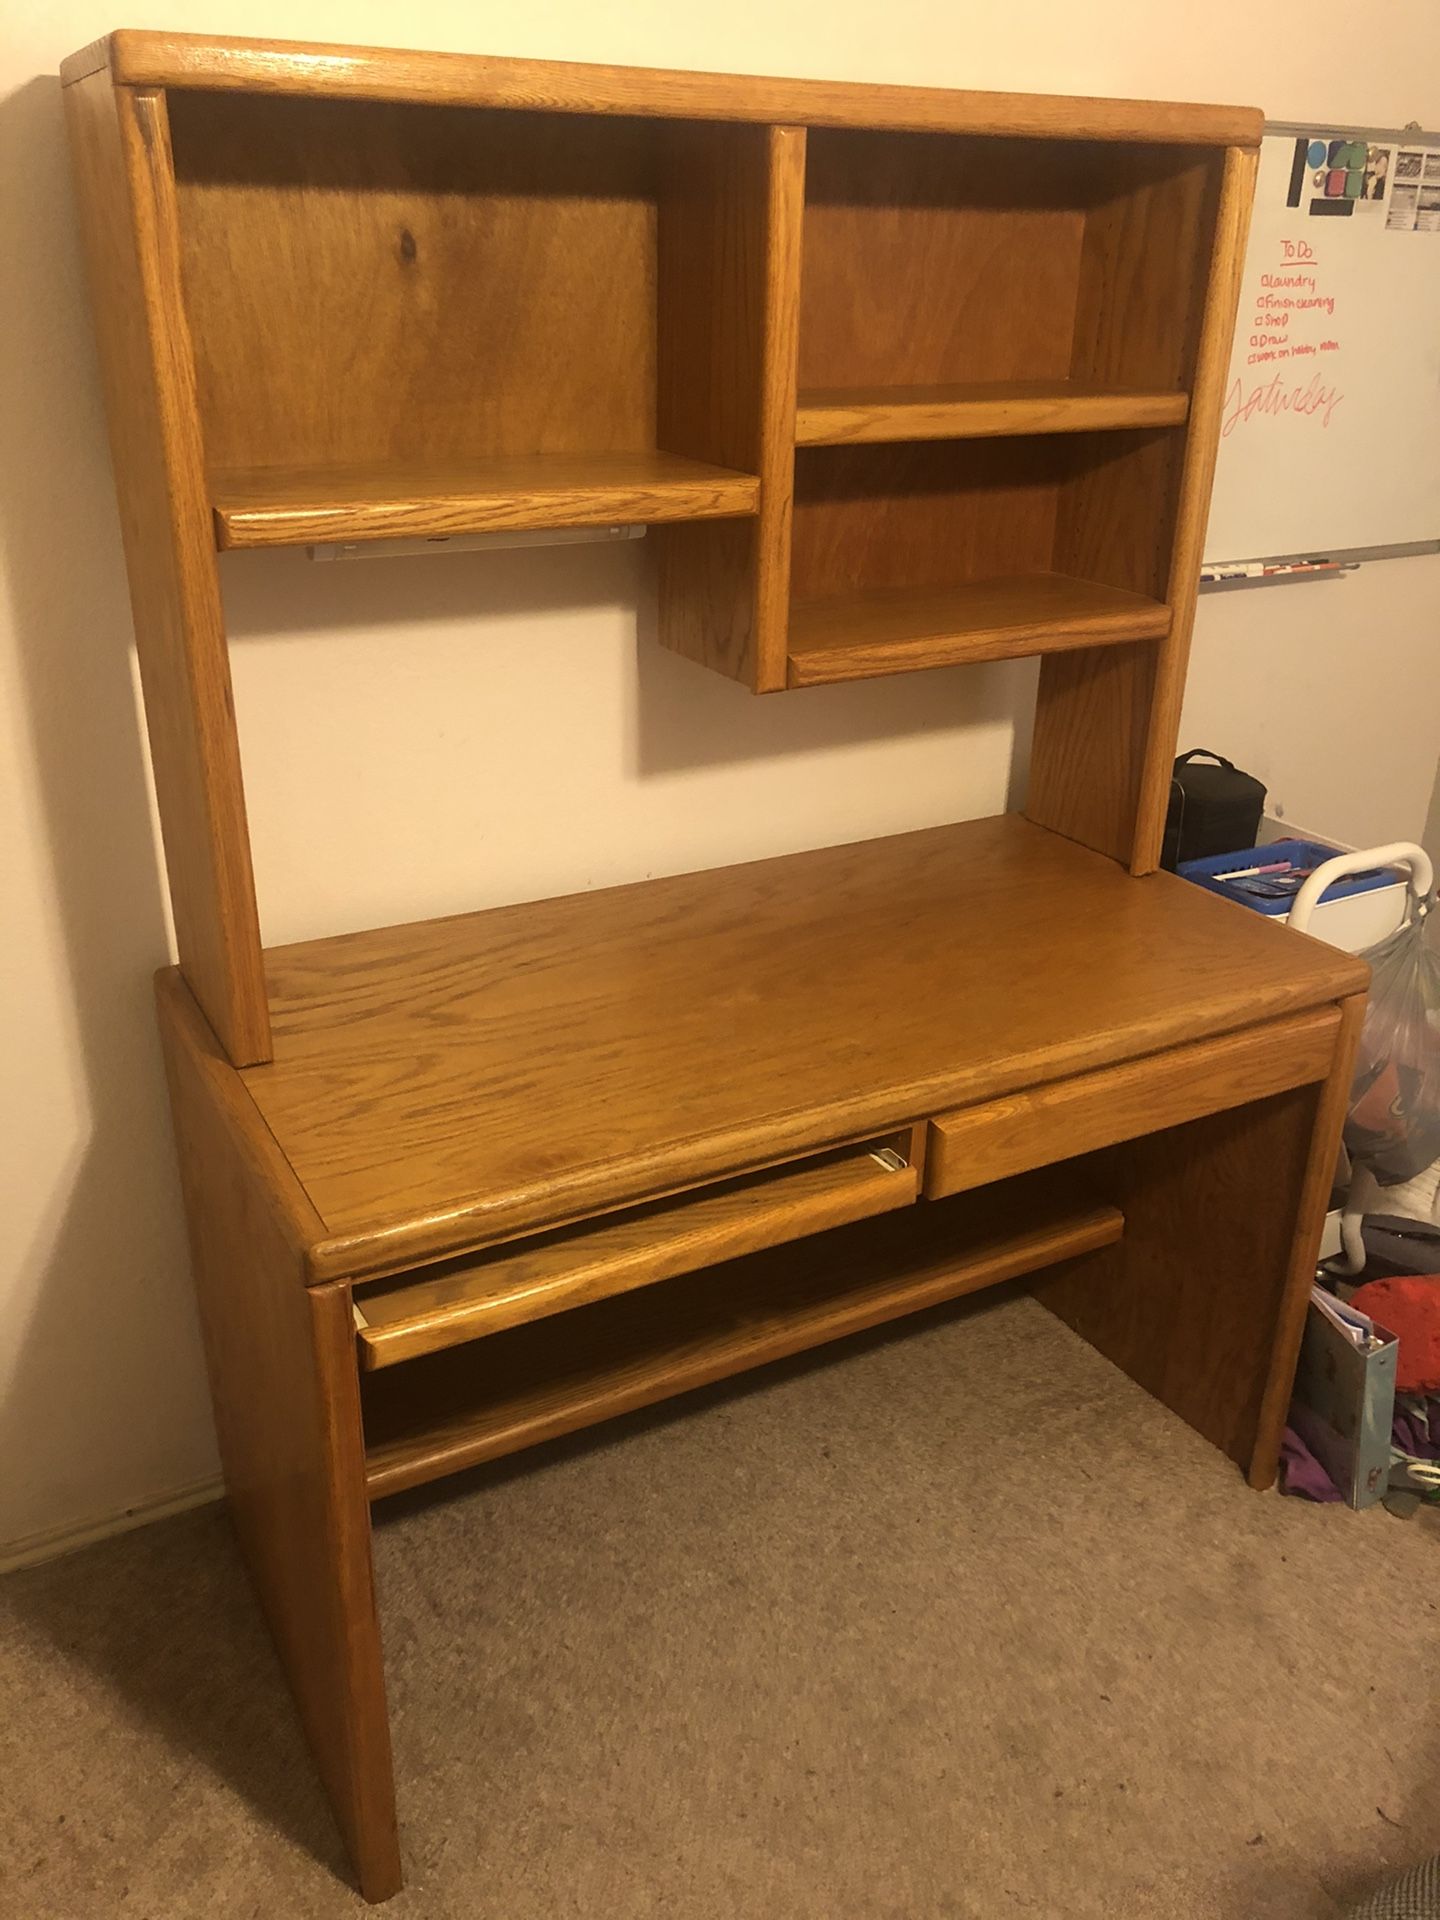 Solid wooden desk with shelving unit